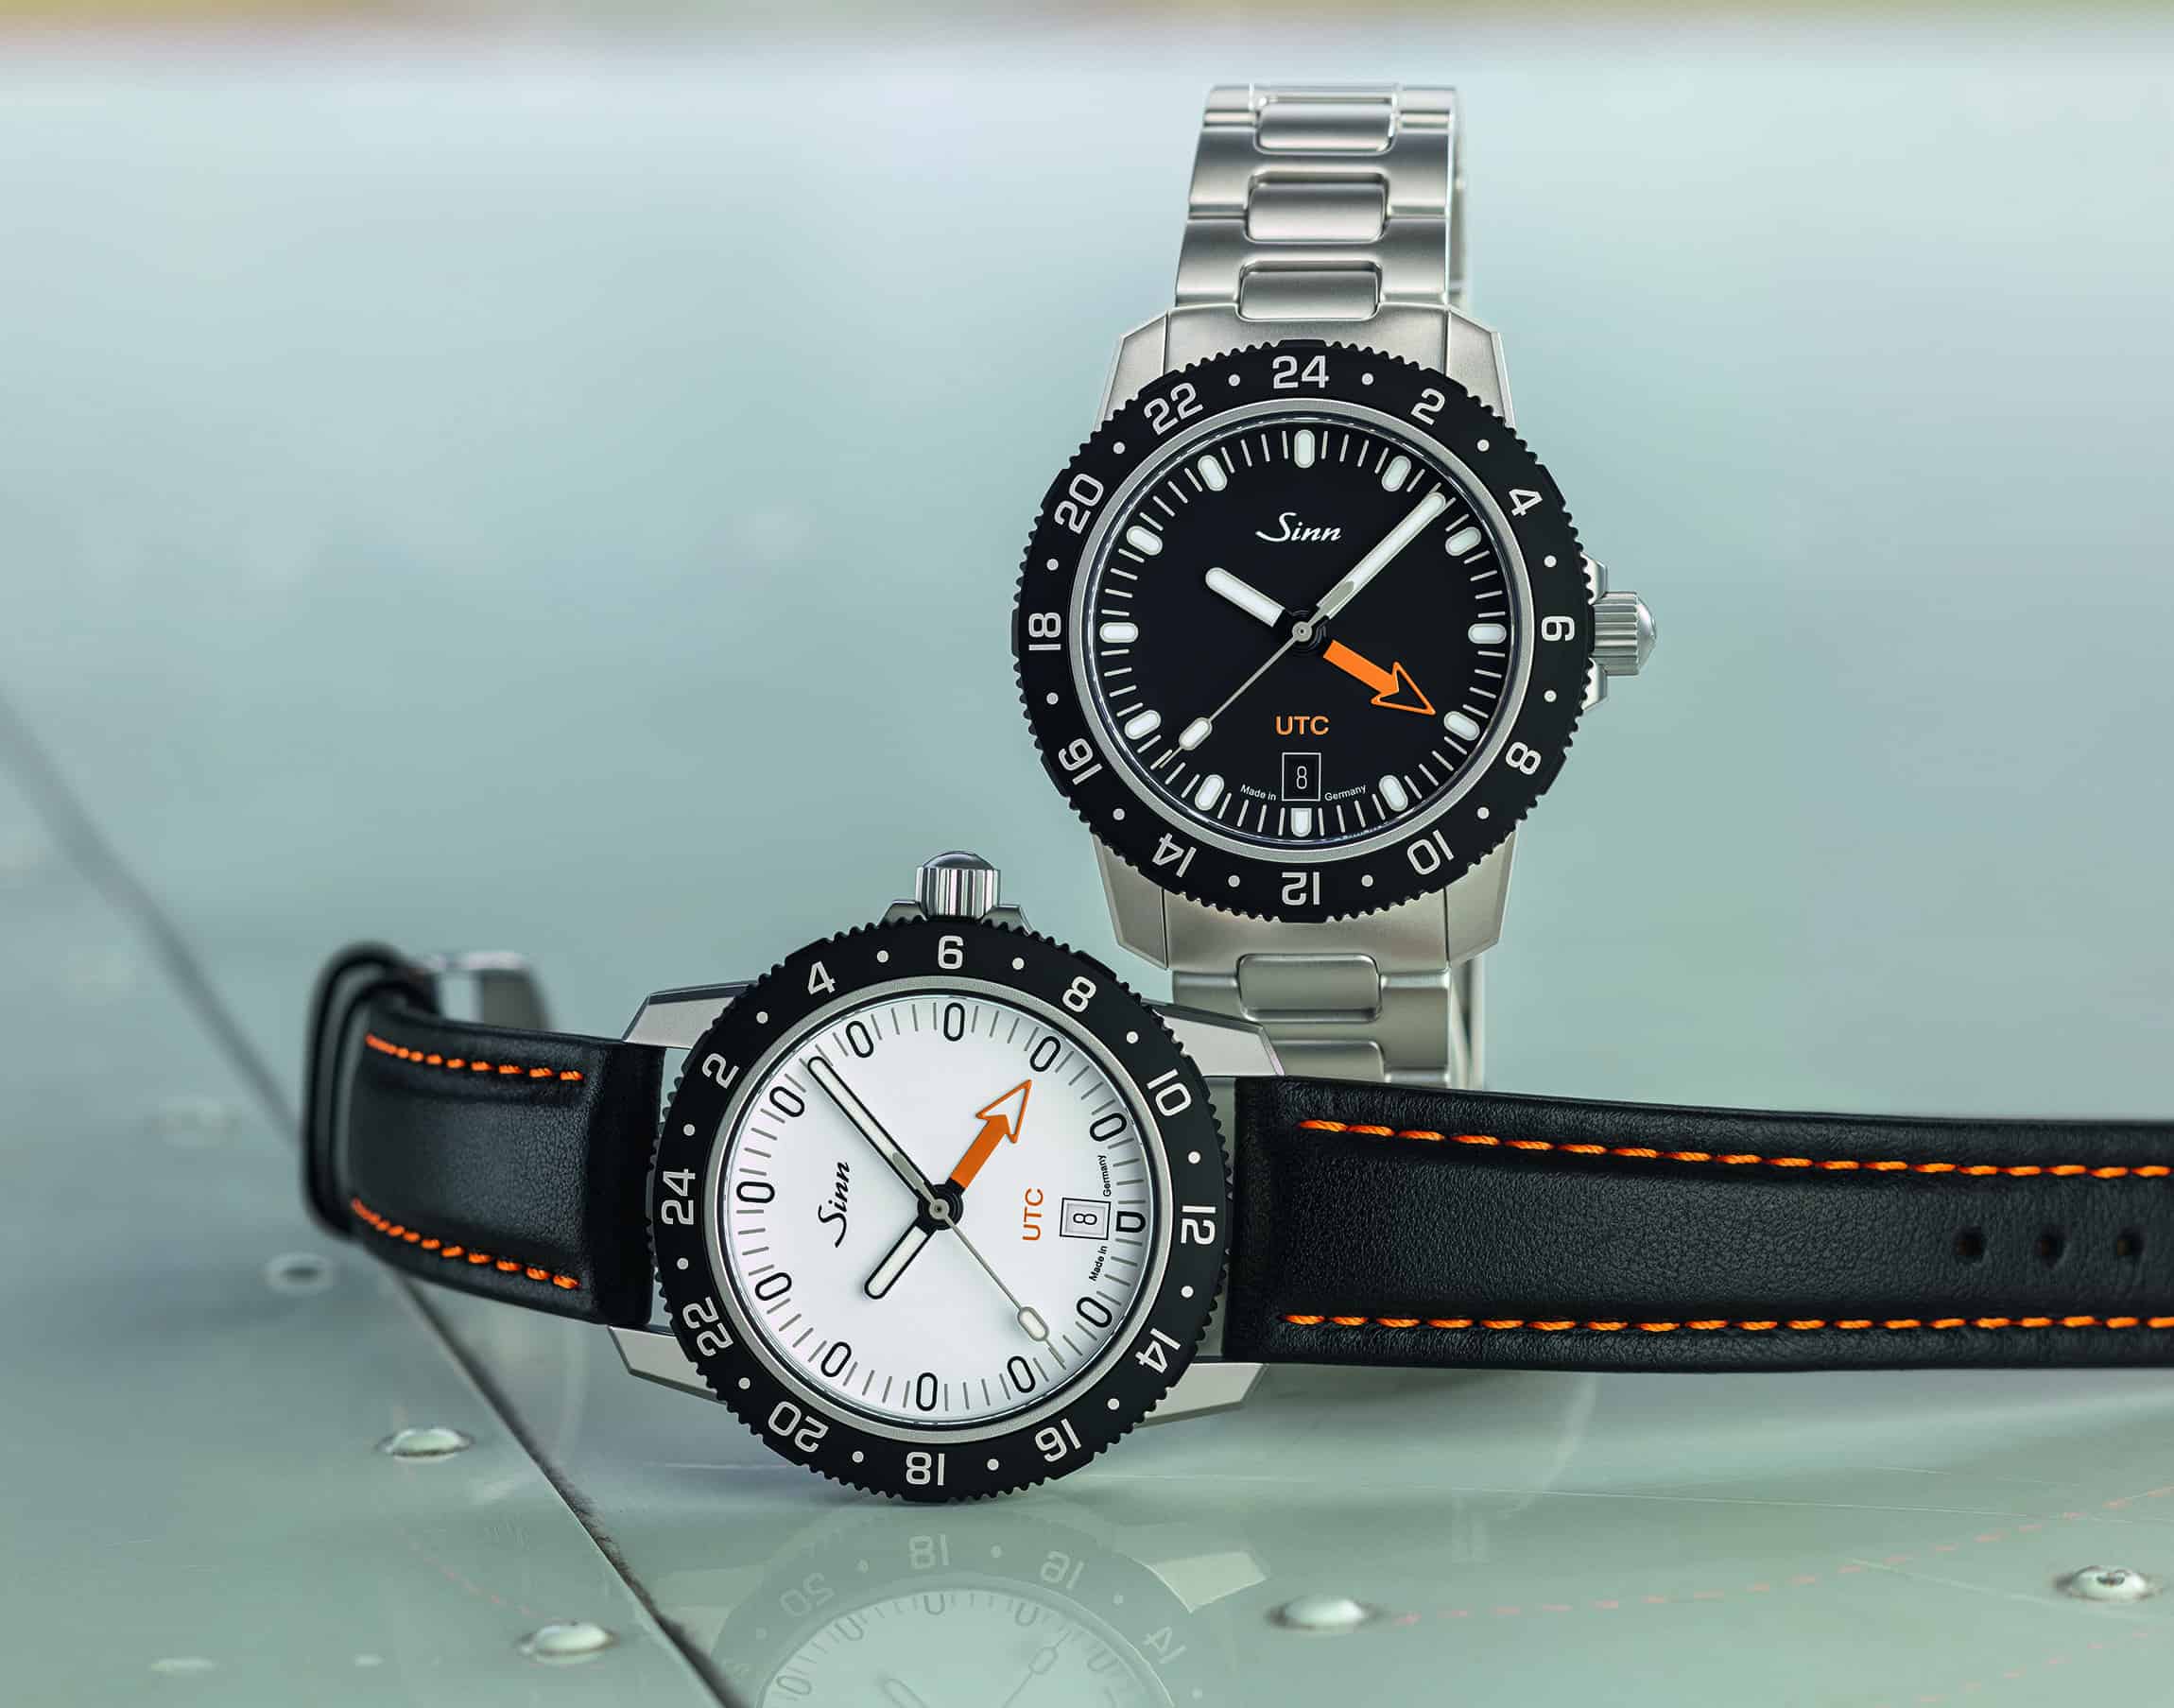 The 3 Watch Collection for Under $5,000: Reader Edition